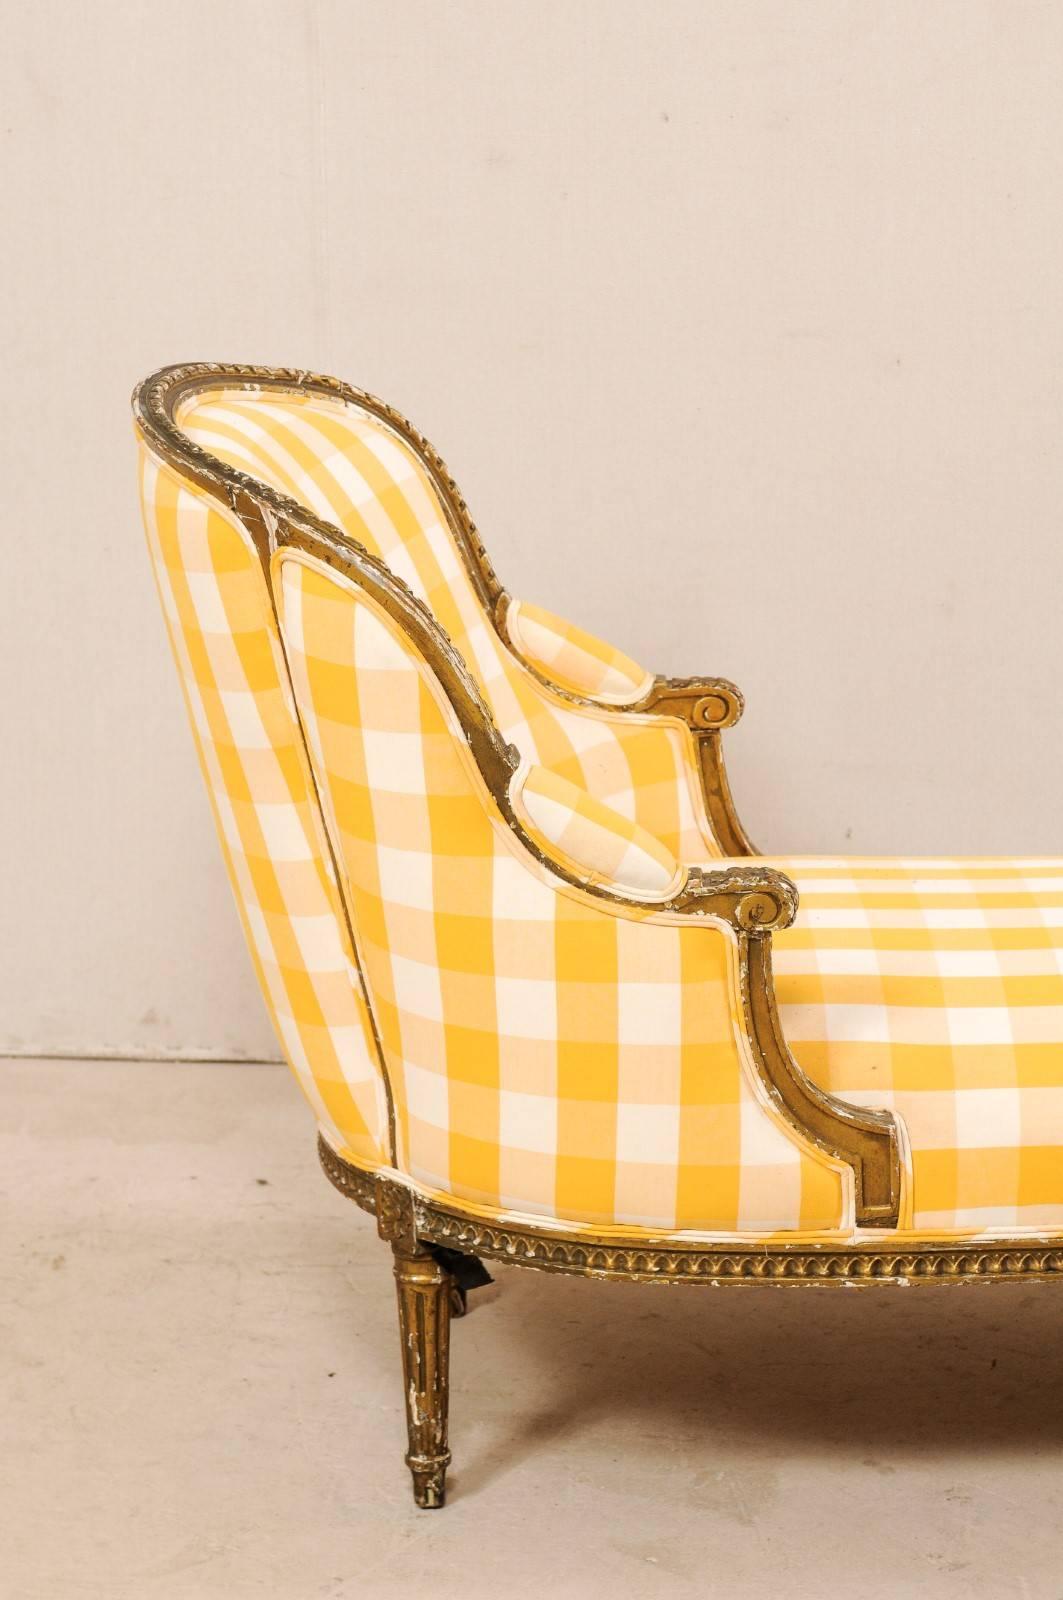 Upholstery French Louis XVI Style Duchesse en Bateau Chaise Lounge Chair, Late 19th C.  For Sale